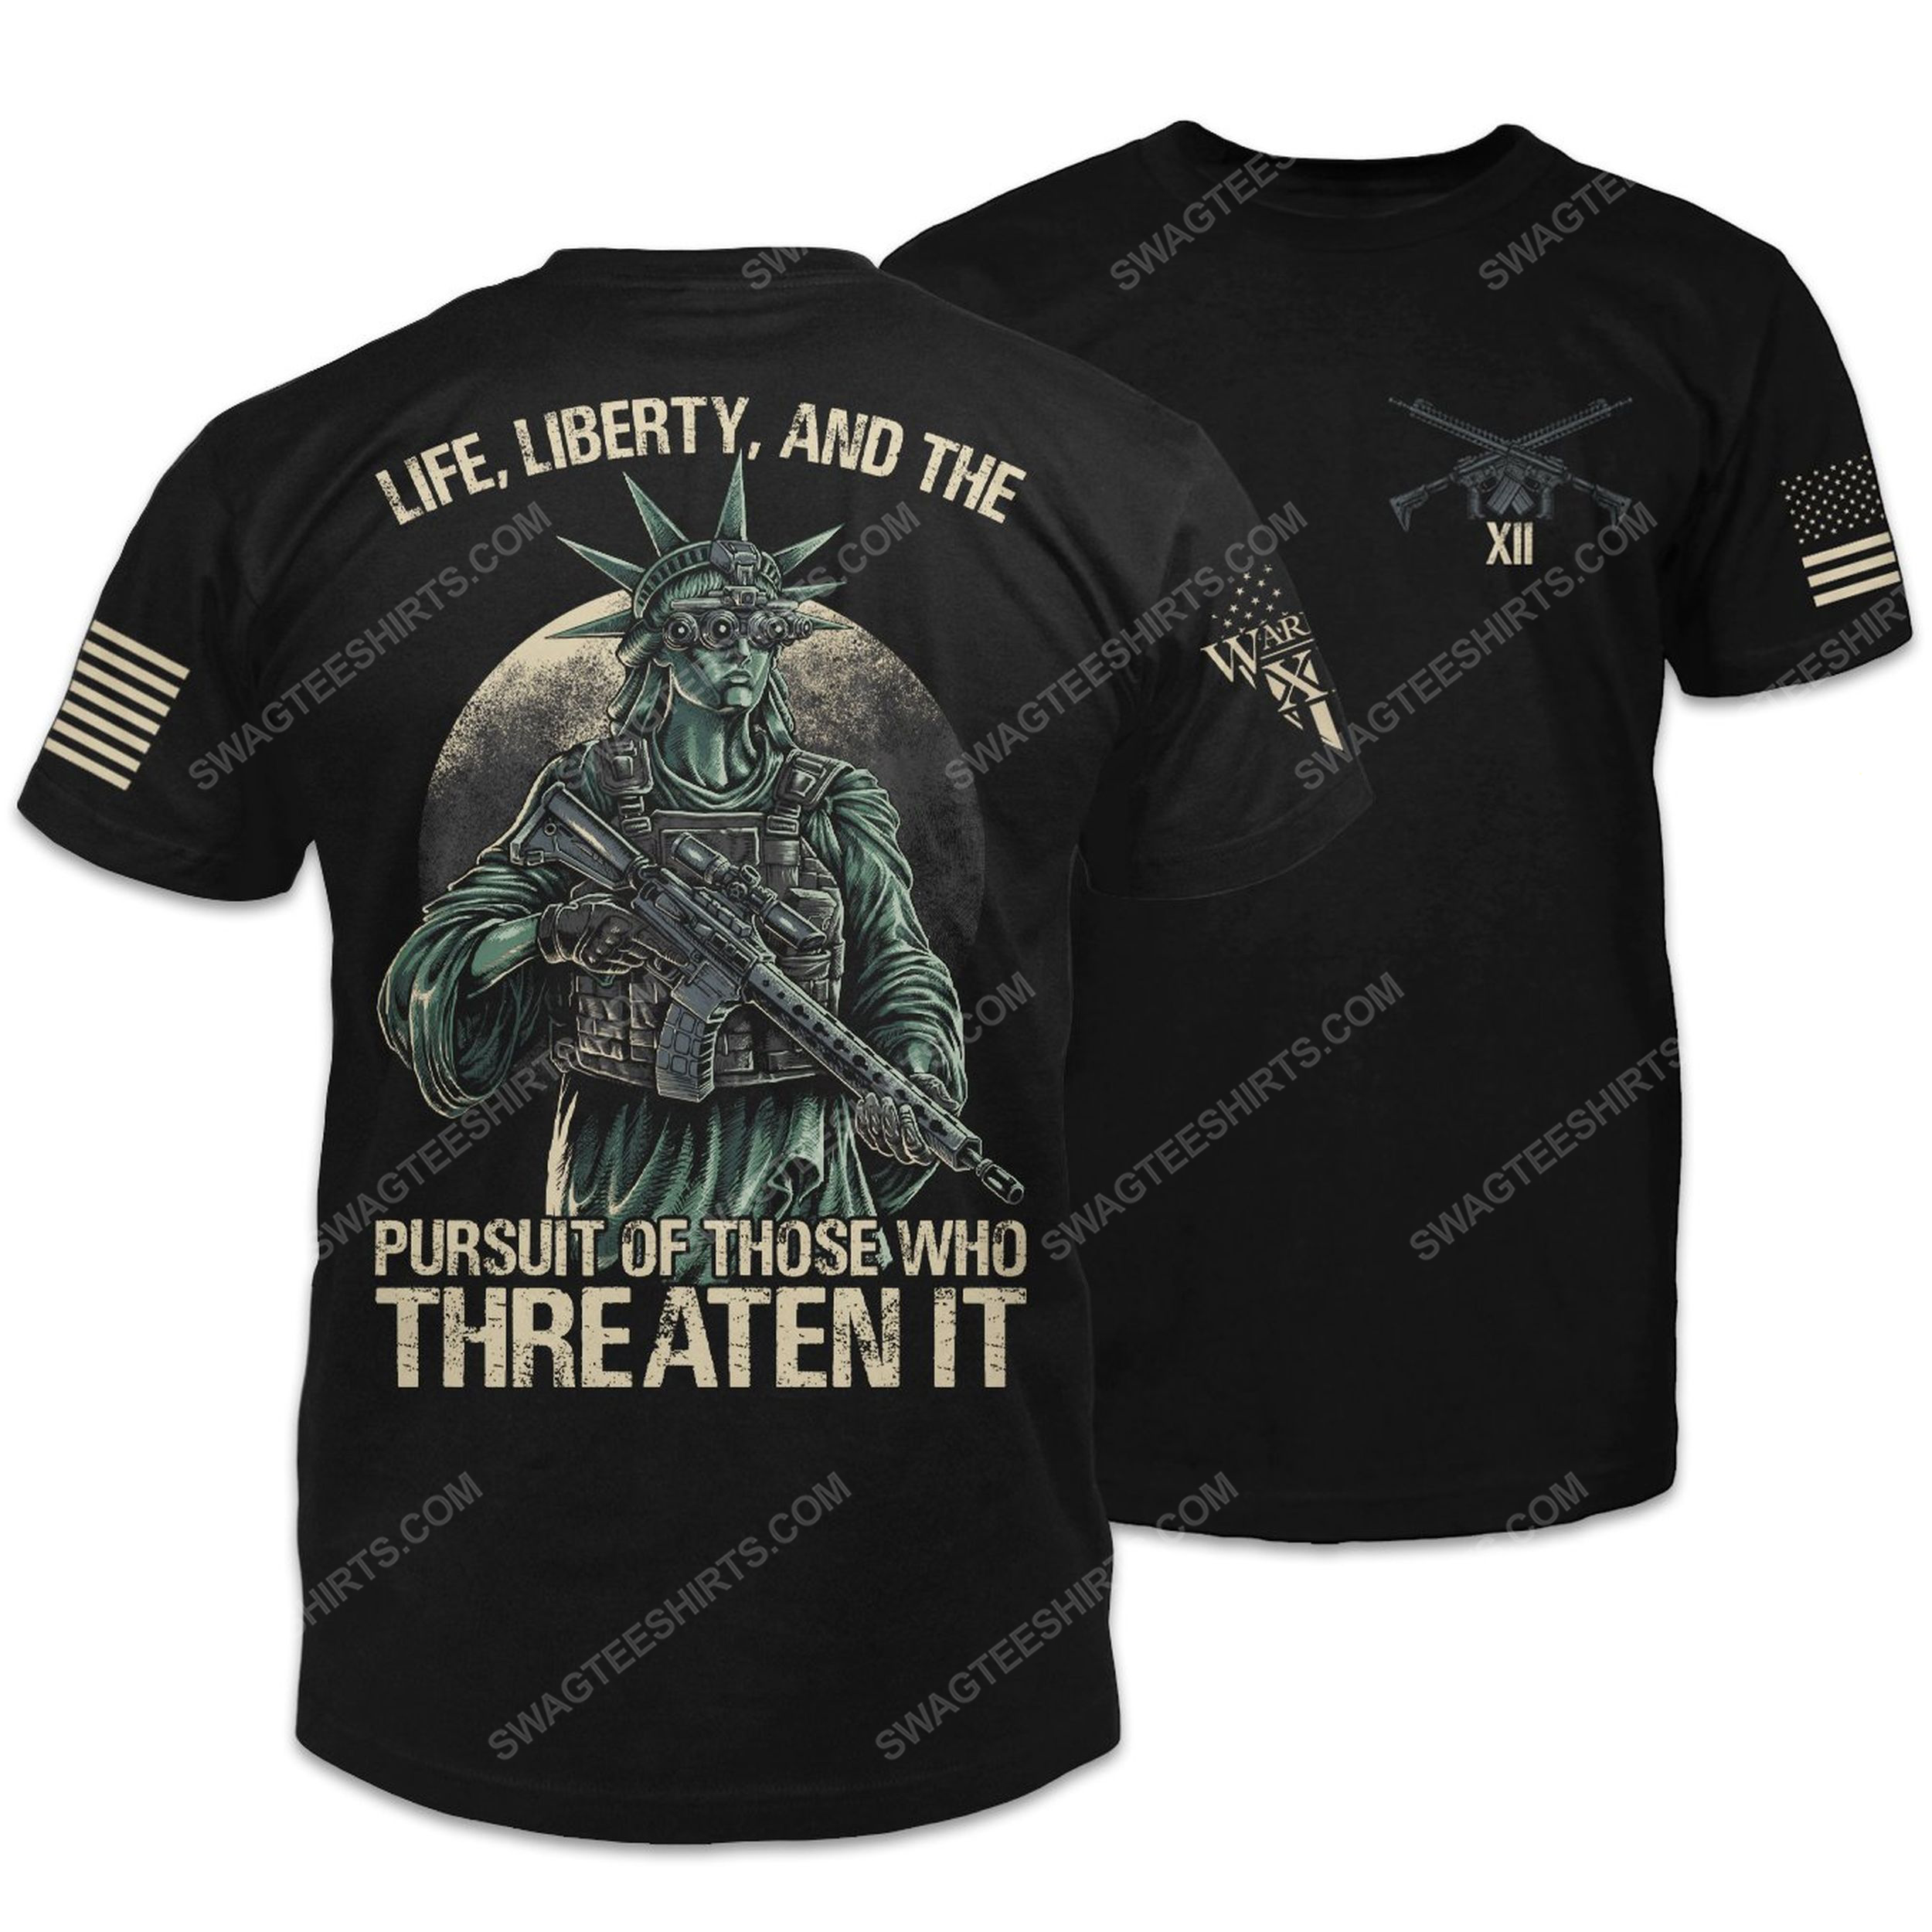 Life liberty and the pursuit of those who threaten it shirt 2(1)